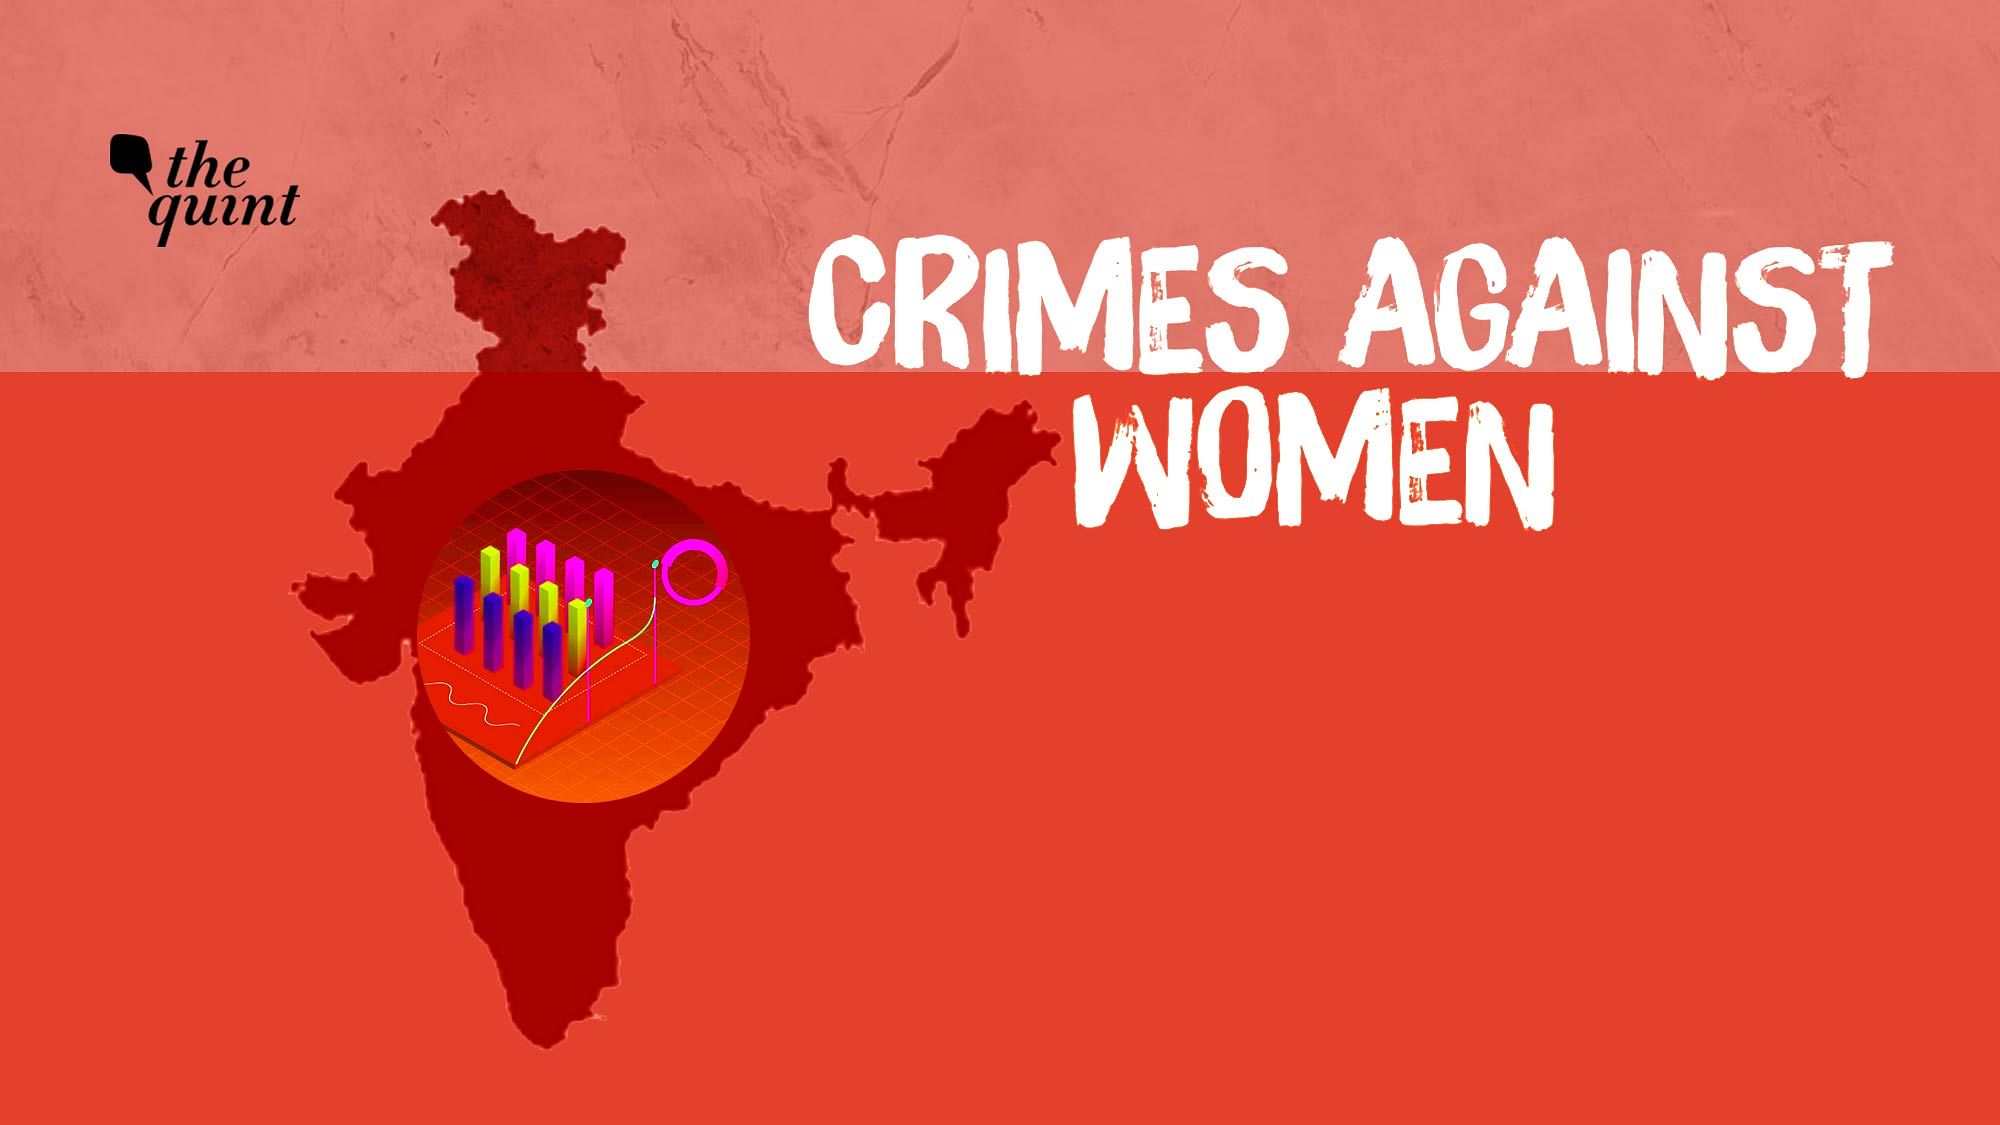 NCRB data shows that crimes against women increased 7.3 percent from 2018 to 2019.